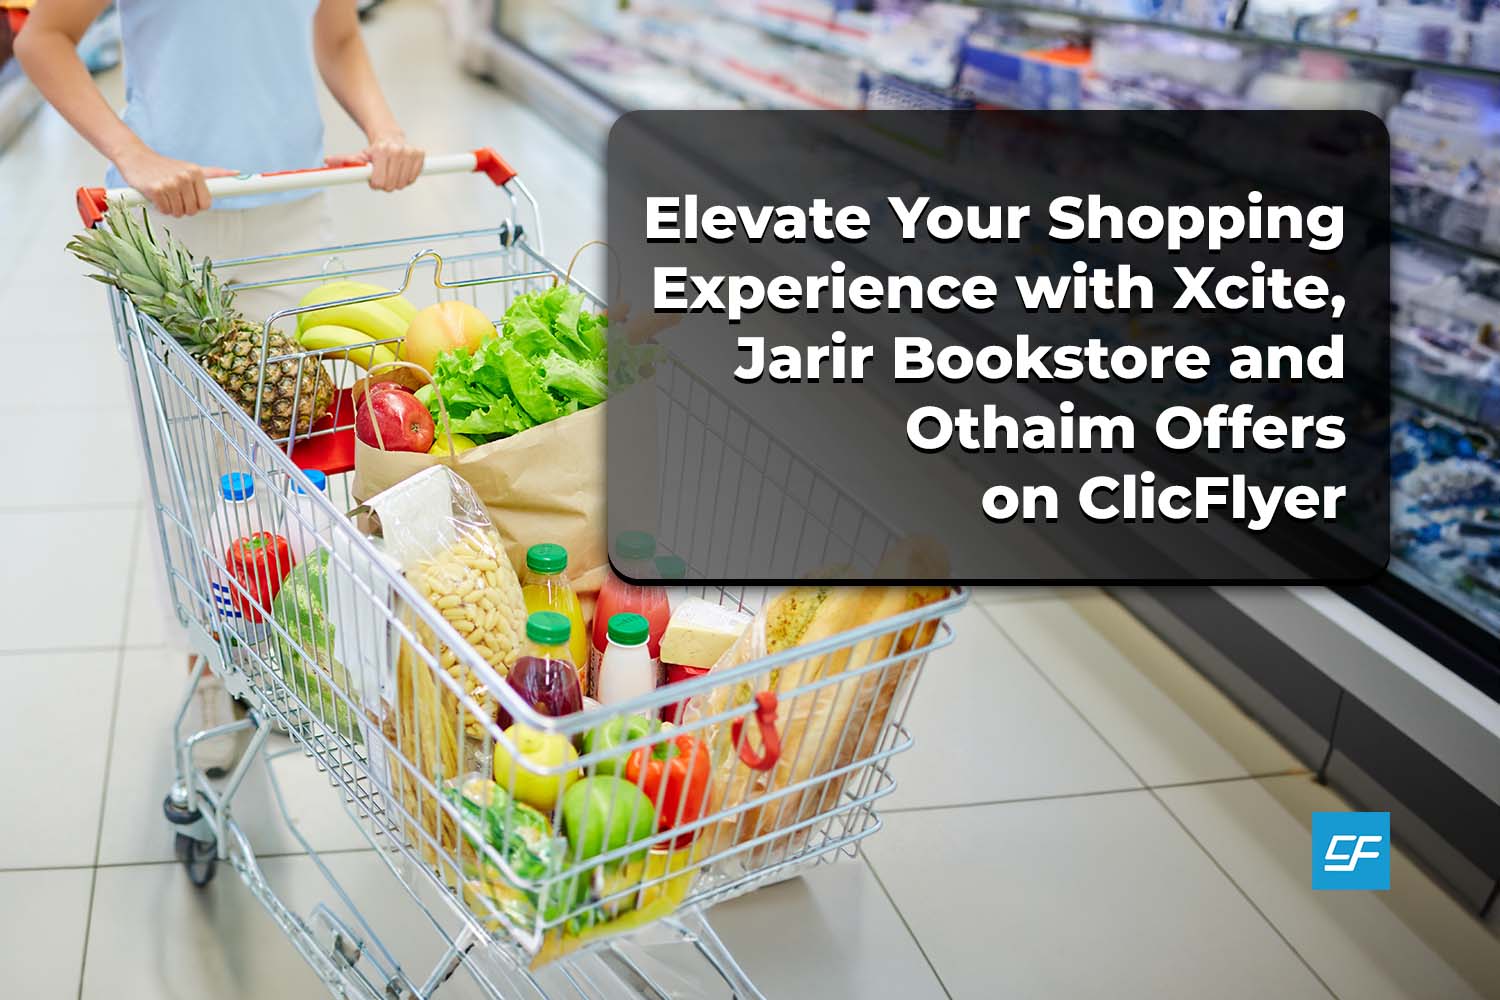 Elevate your shopping experience